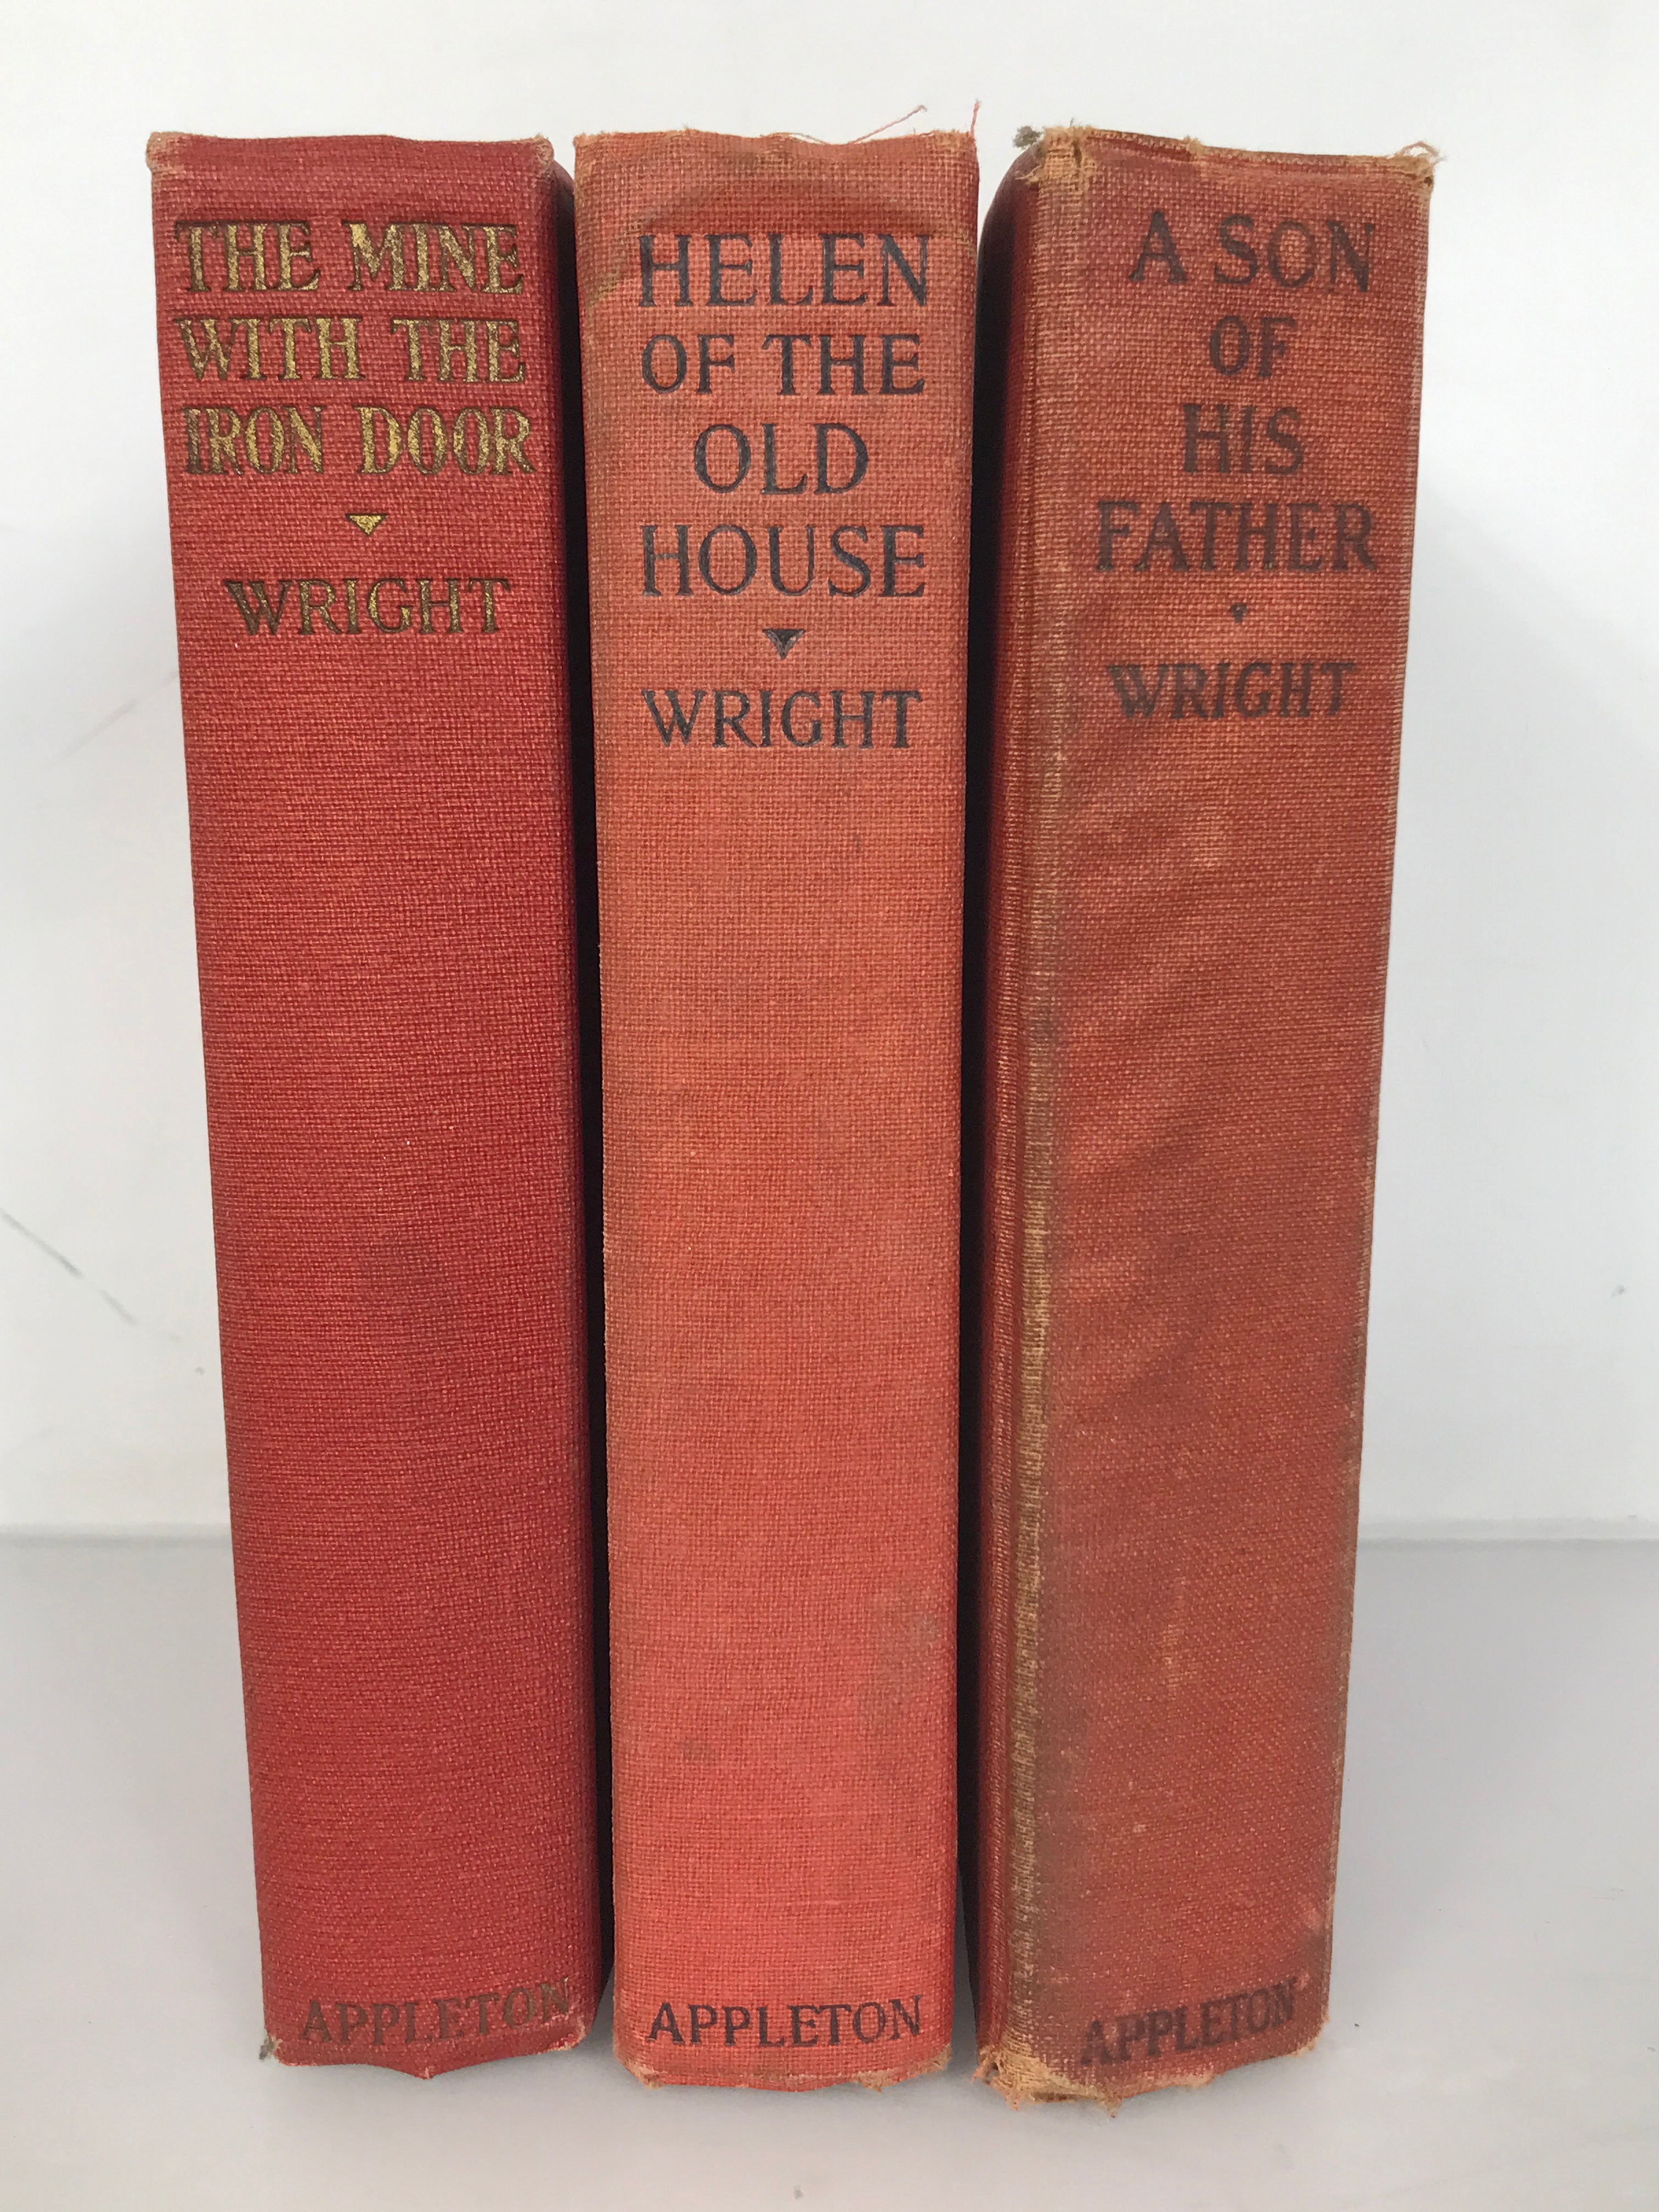 Lot of 3 Harold Bell Wright Books: A Son of His Father (1925), Helen of the Old House (1921), and The Mine With the Iron Door (1923) HC